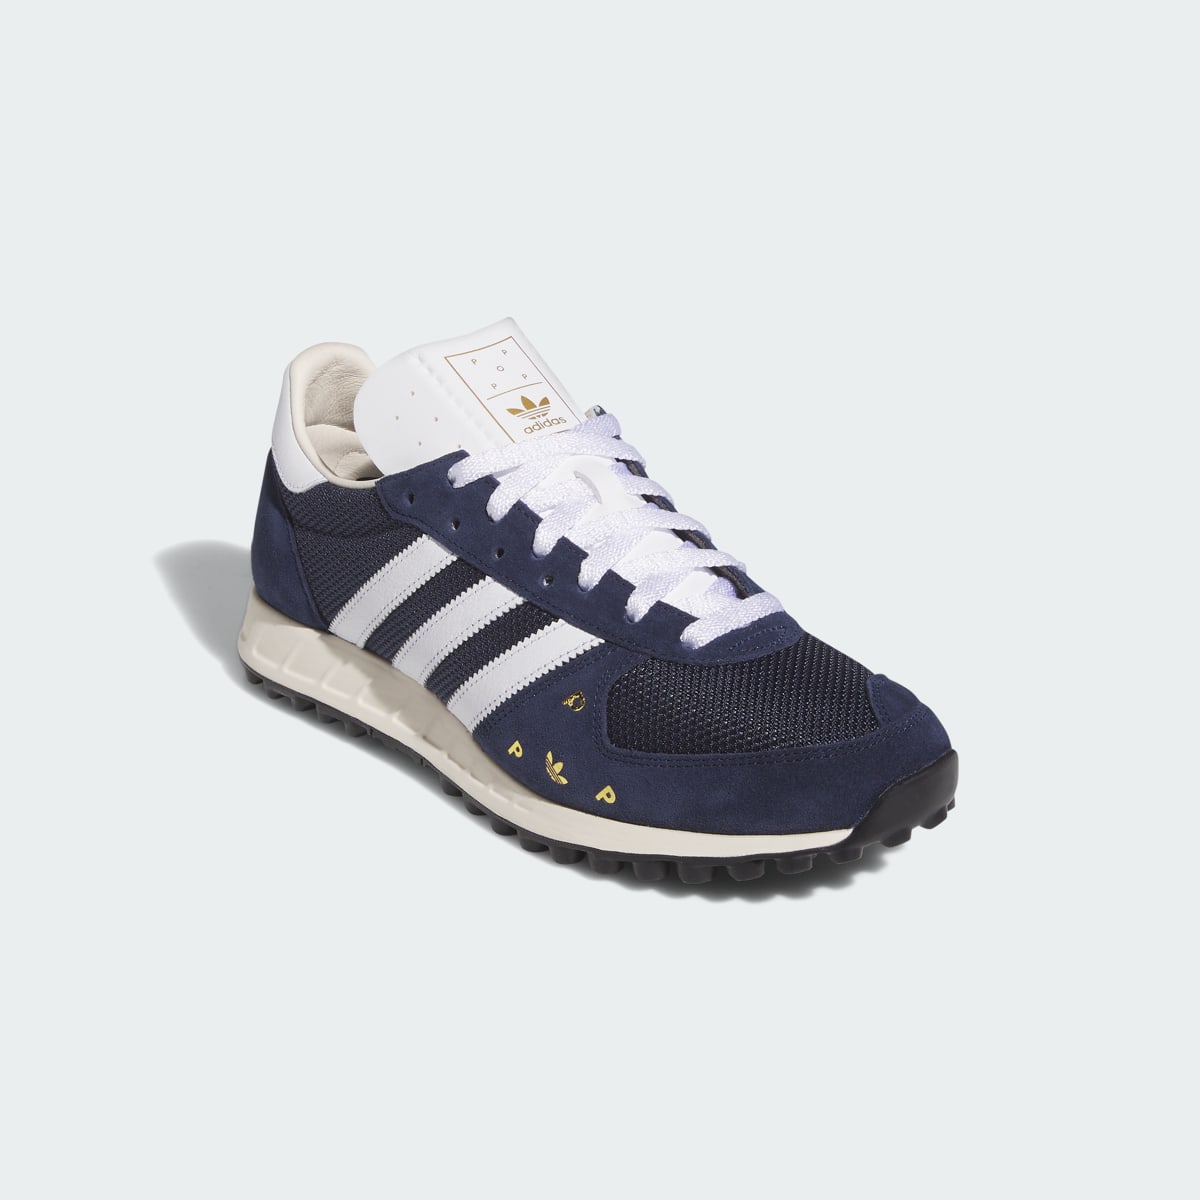 Adidas Pop Trading Co TRX Trainers. 6